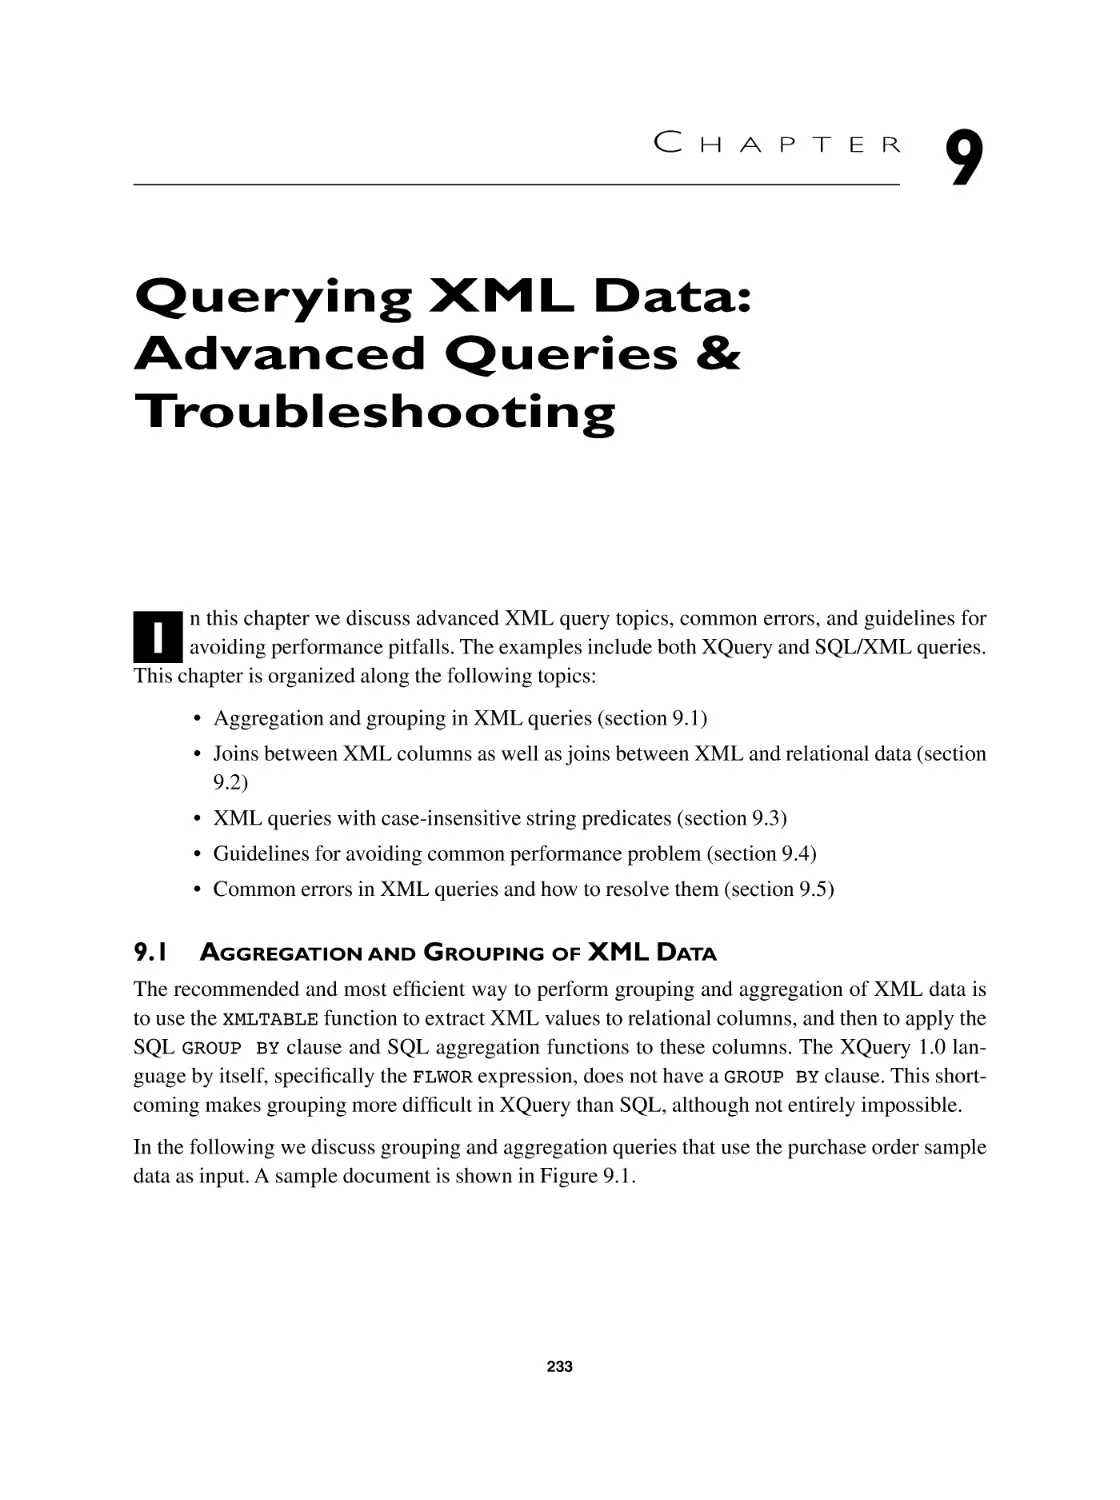 Chapter 9 Querying XML Data
9.1 Aggregation and Grouping of XML Data